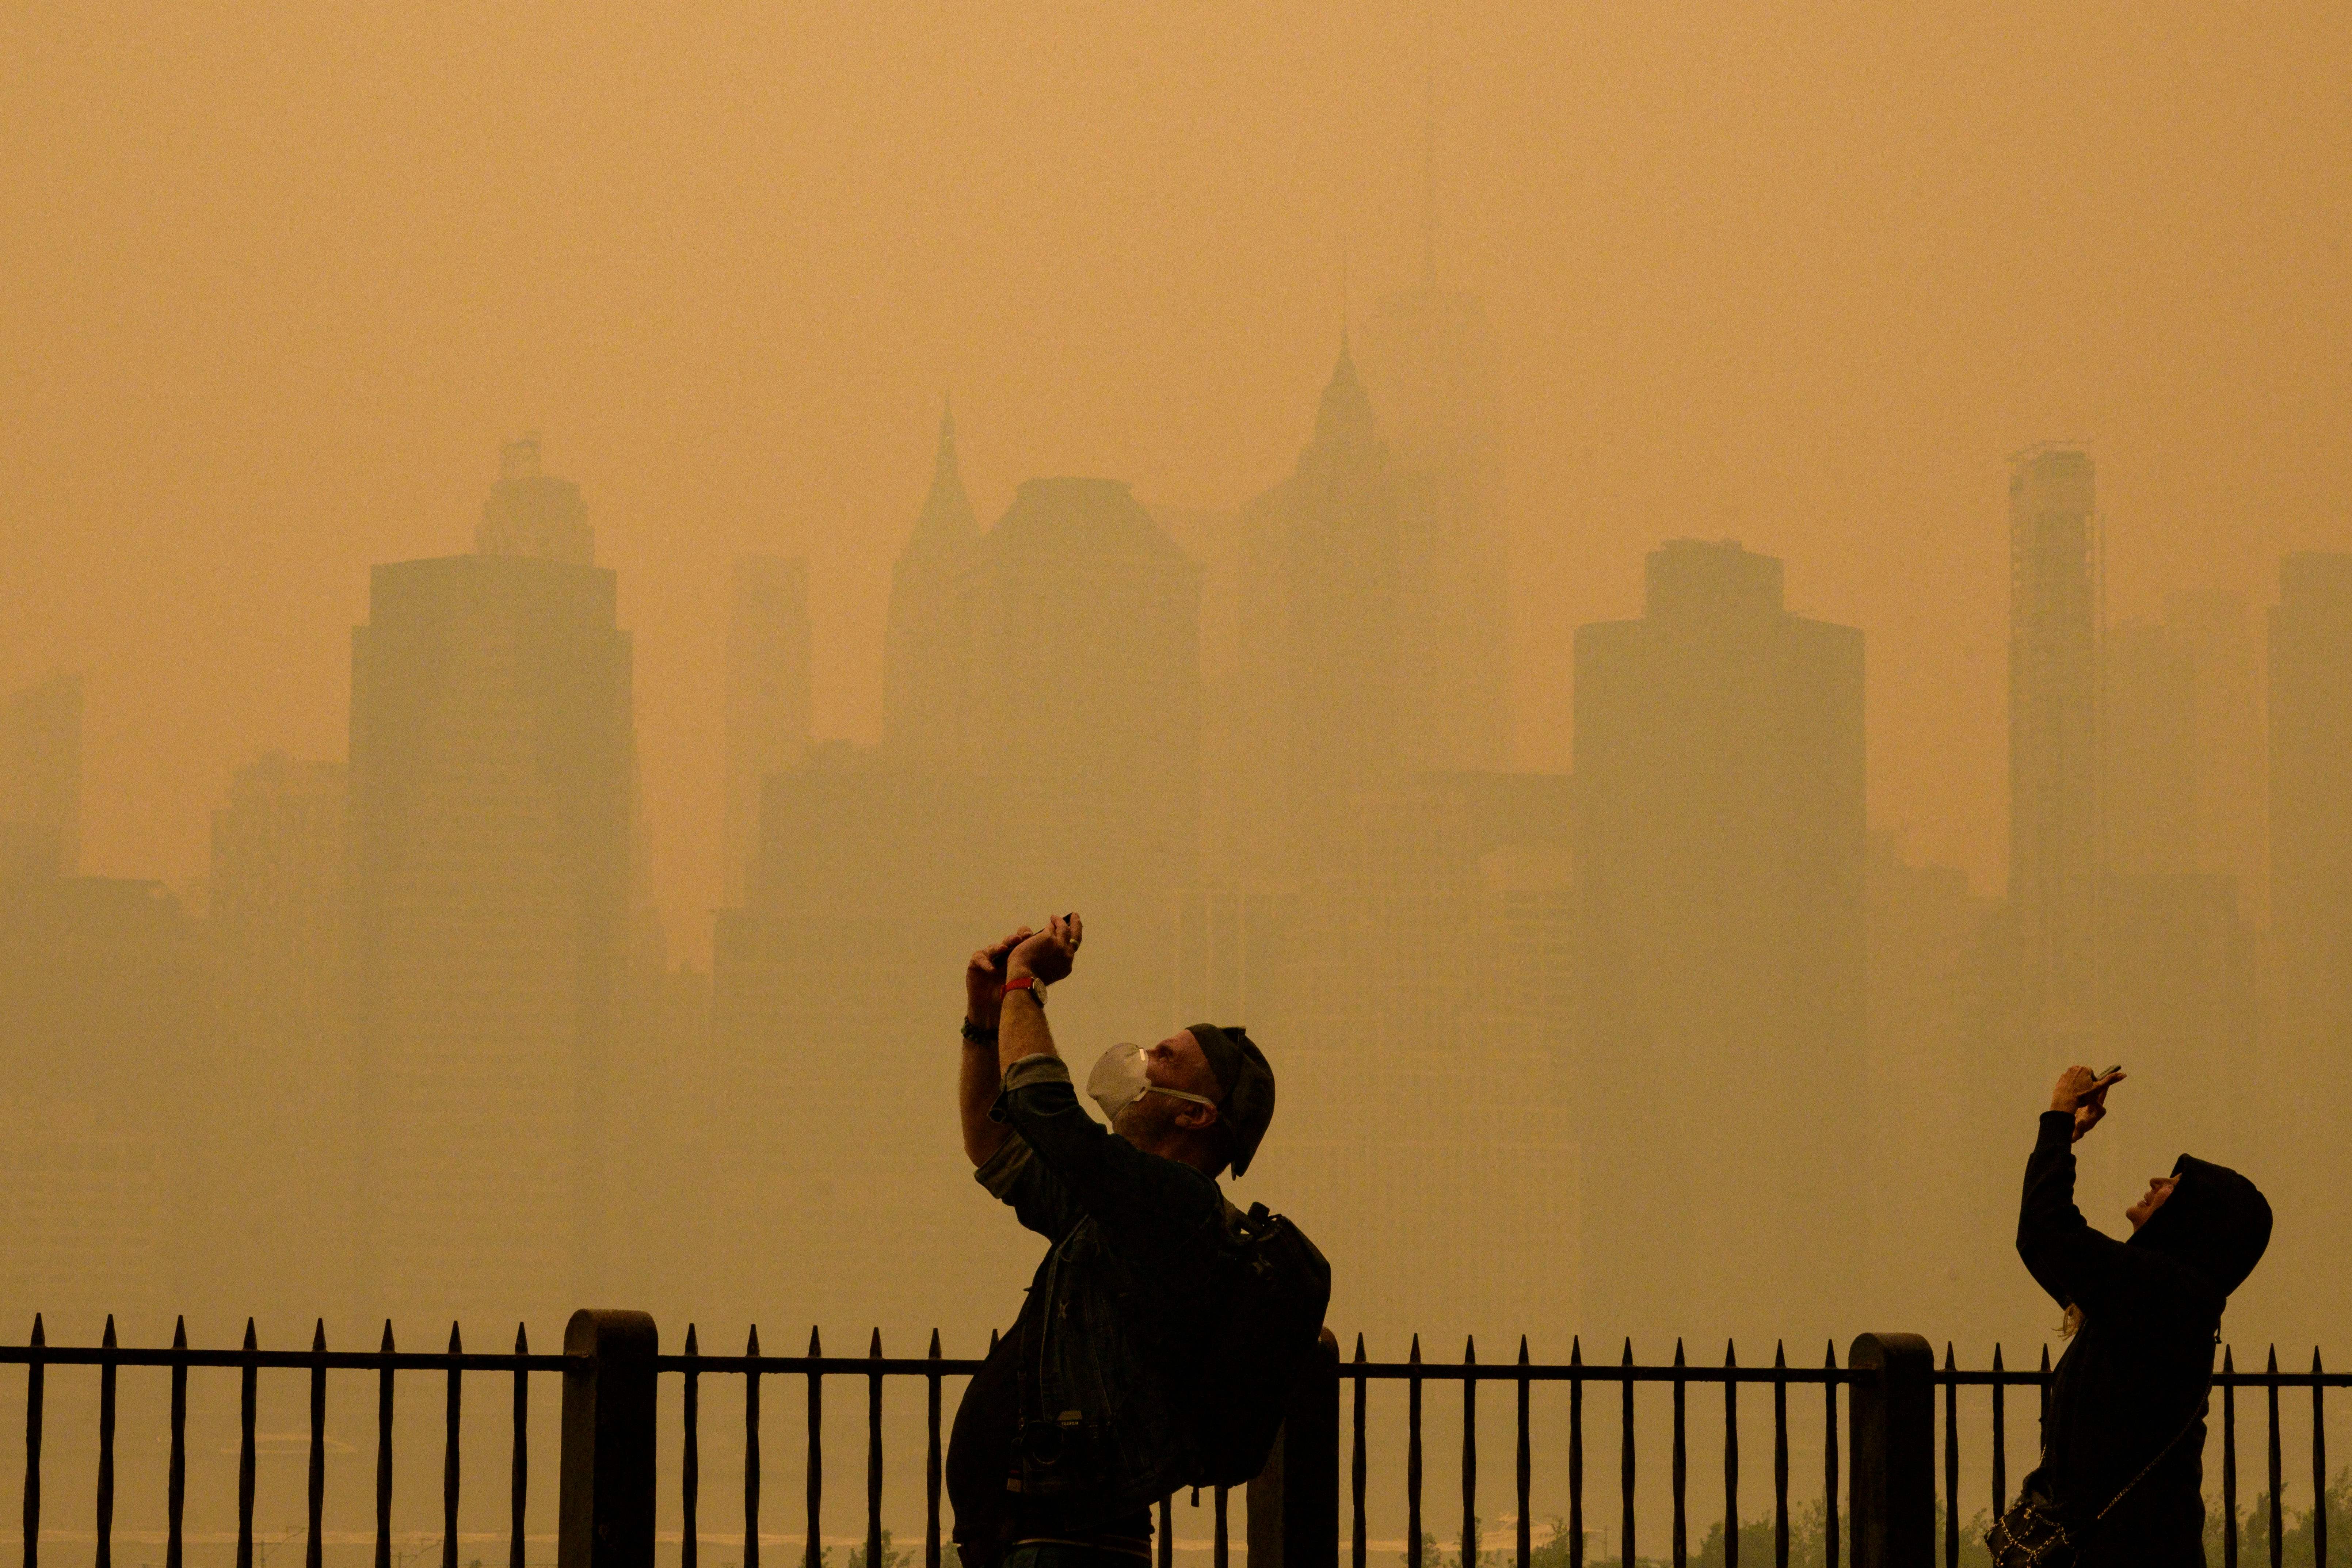 Wildfire smoke photos in NYC show ‘apocalyptic' sepia landscape